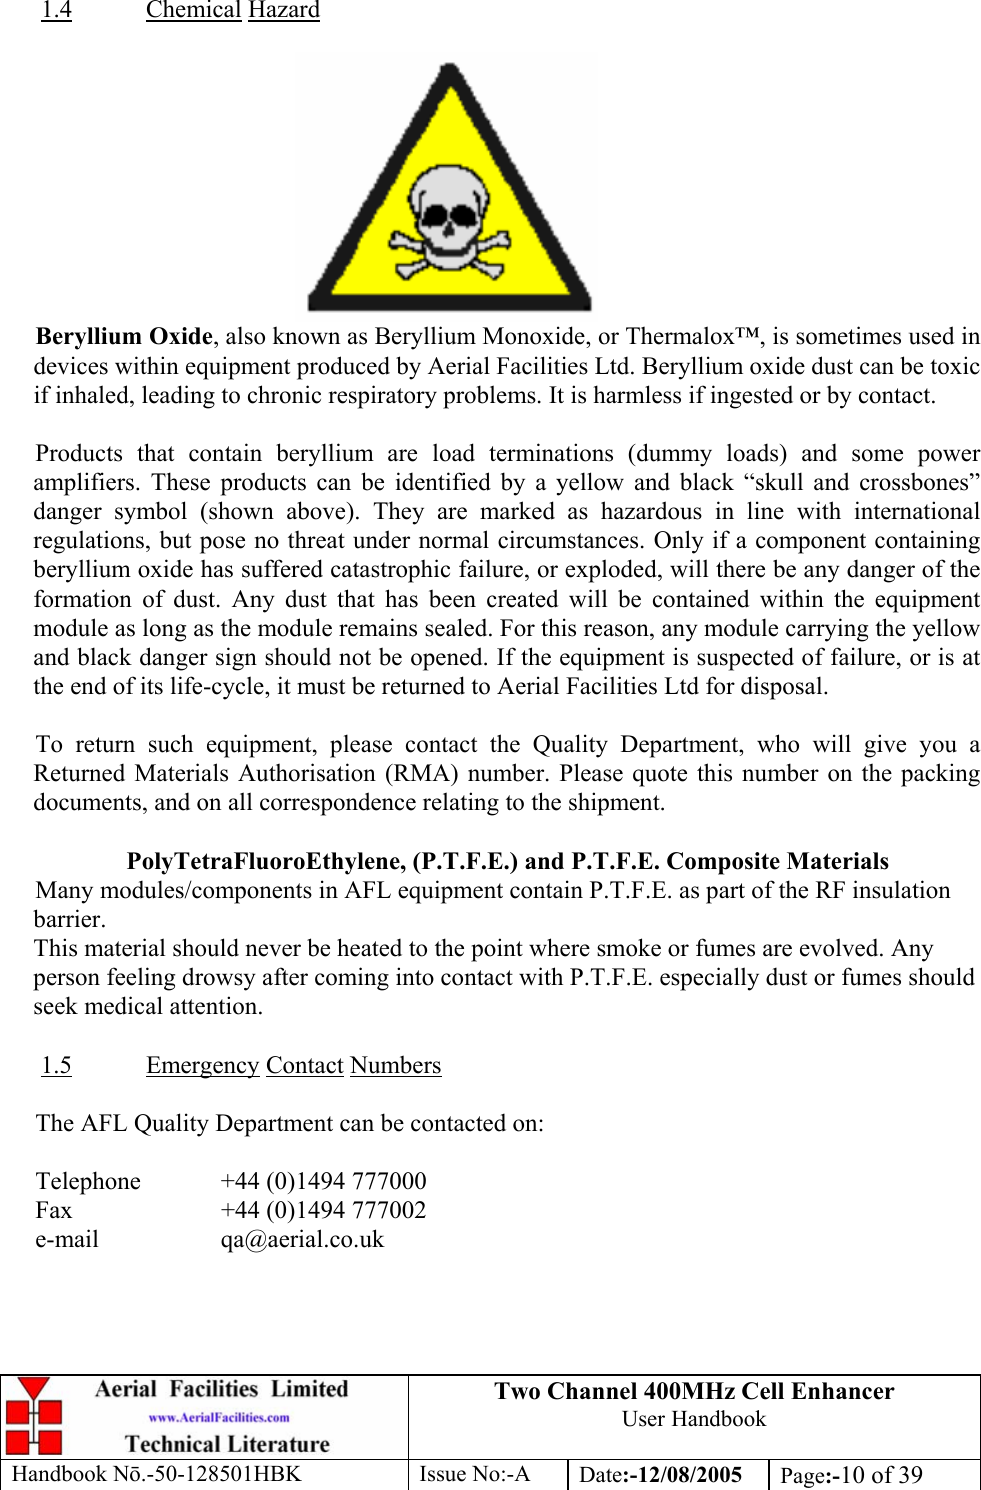 Two Channel 400MHz Cell Enhancer User Handbook Handbook N.-50-128501HBK Issue No:-A Date:-12/08/2005  Page:-10 of 39   1.4 Chemical Hazard   Beryllium Oxide, also known as Beryllium Monoxide, or Thermalox™, is sometimes used in devices within equipment produced by Aerial Facilities Ltd. Beryllium oxide dust can be toxic if inhaled, leading to chronic respiratory problems. It is harmless if ingested or by contact.  Products that contain beryllium are load terminations (dummy loads) and some power amplifiers. These products can be identified by a yellow and black “skull and crossbones” danger symbol (shown above). They are marked as hazardous in line with international regulations, but pose no threat under normal circumstances. Only if a component containing beryllium oxide has suffered catastrophic failure, or exploded, will there be any danger of the formation of dust. Any dust that has been created will be contained within the equipment module as long as the module remains sealed. For this reason, any module carrying the yellow and black danger sign should not be opened. If the equipment is suspected of failure, or is at the end of its life-cycle, it must be returned to Aerial Facilities Ltd for disposal.  To return such equipment, please contact the Quality Department, who will give you a Returned Materials Authorisation (RMA) number. Please quote this number on the packing documents, and on all correspondence relating to the shipment.  PolyTetraFluoroEthylene, (P.T.F.E.) and P.T.F.E. Composite Materials Many modules/components in AFL equipment contain P.T.F.E. as part of the RF insulation barrier. This material should never be heated to the point where smoke or fumes are evolved. Any person feeling drowsy after coming into contact with P.T.F.E. especially dust or fumes should seek medical attention.  1.5 Emergency Contact Numbers  The AFL Quality Department can be contacted on:  Telephone   +44 (0)1494 777000 Fax    +44 (0)1494 777002 e-mail   qa@aerial.co.uk  